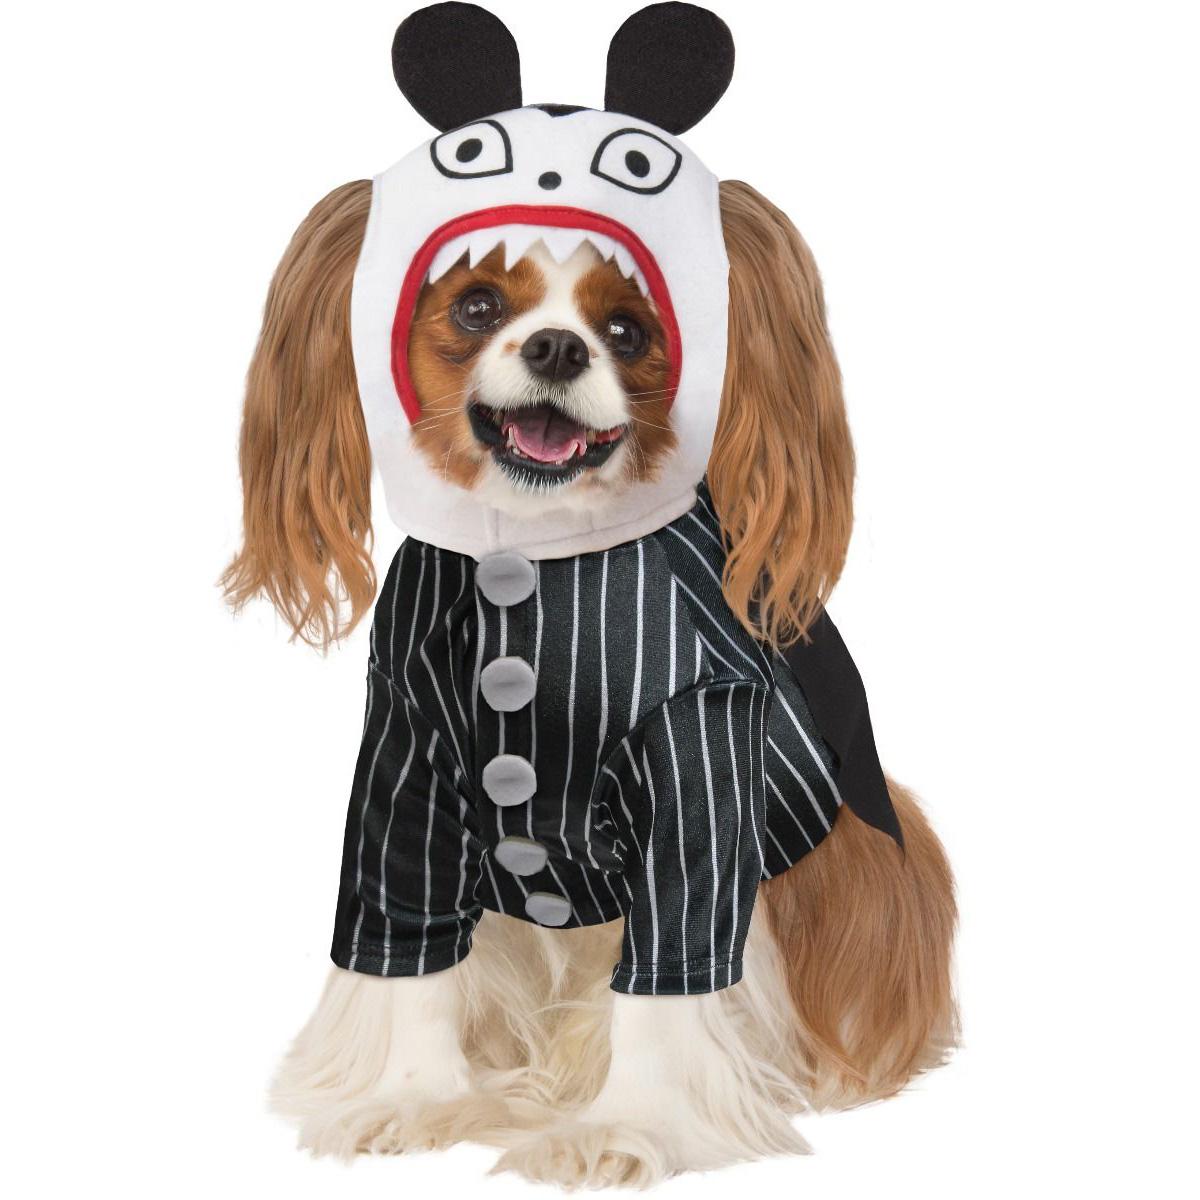 Nightmare Before Christmas Scary Teddy Dog Costume by Rubies